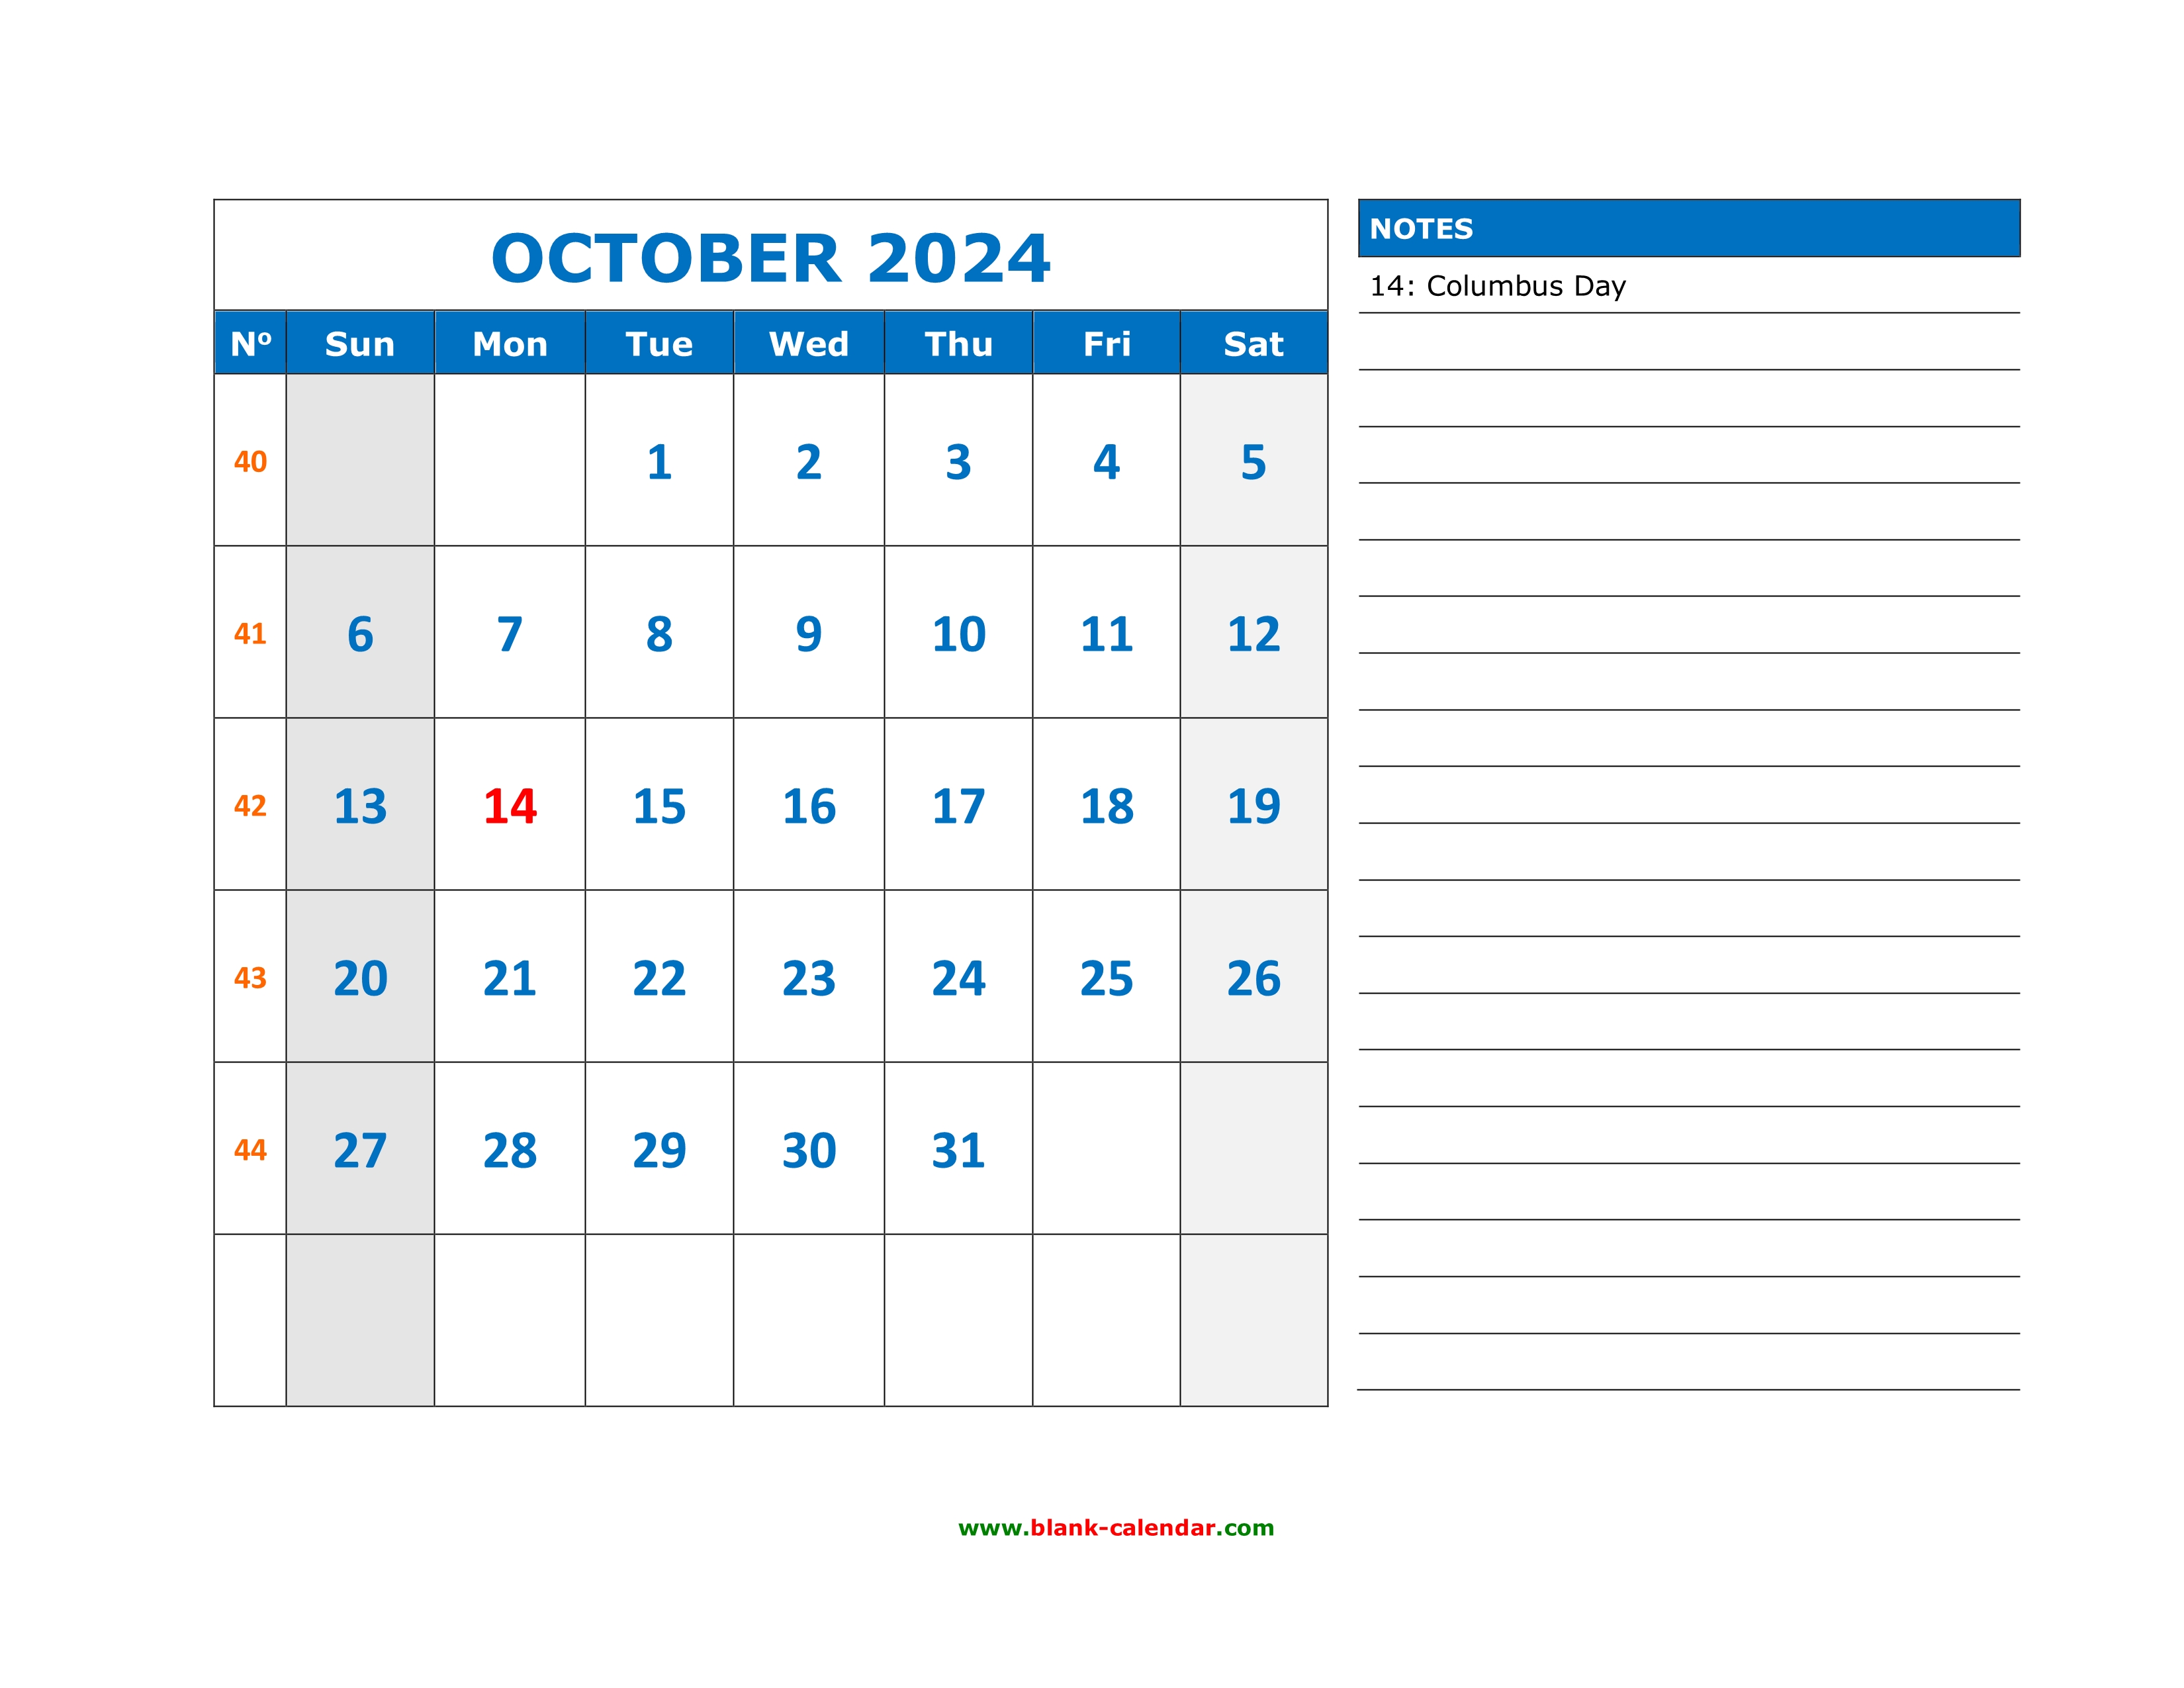 Free Download Printable October 2024 Calendar, large space for